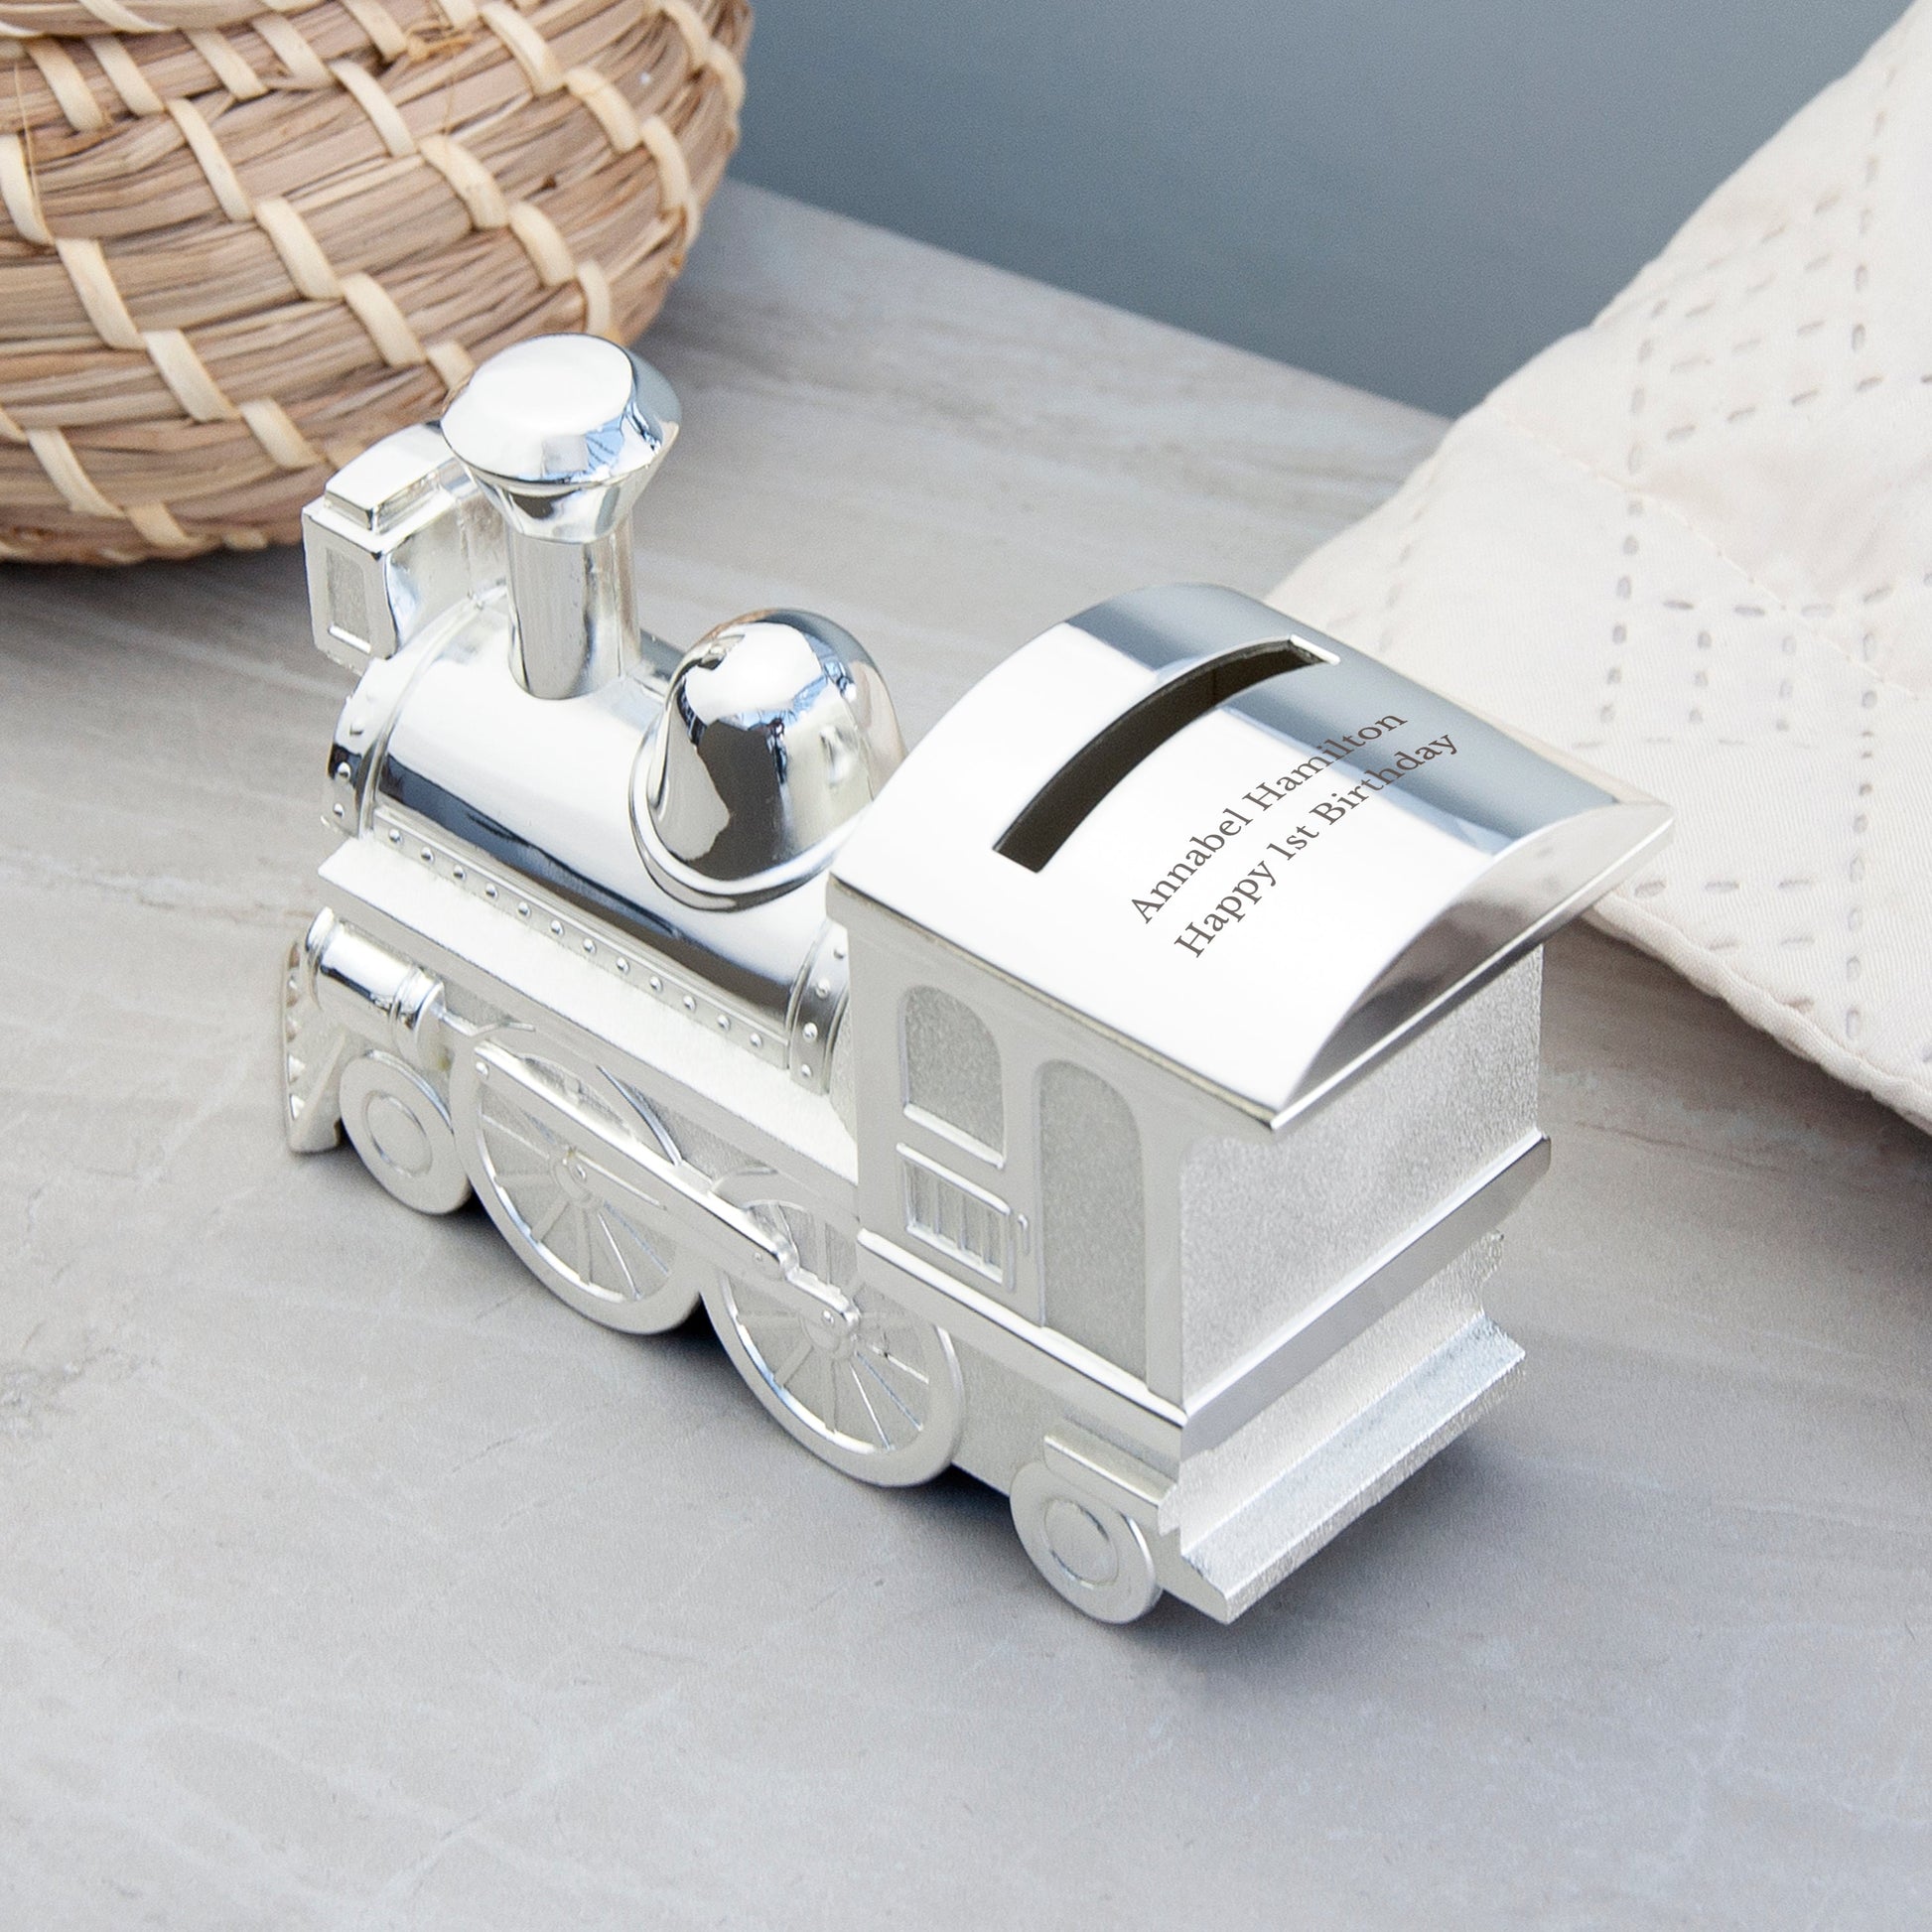 Personalized Money Boxes - Personalized Silver Plated Train Money Box 